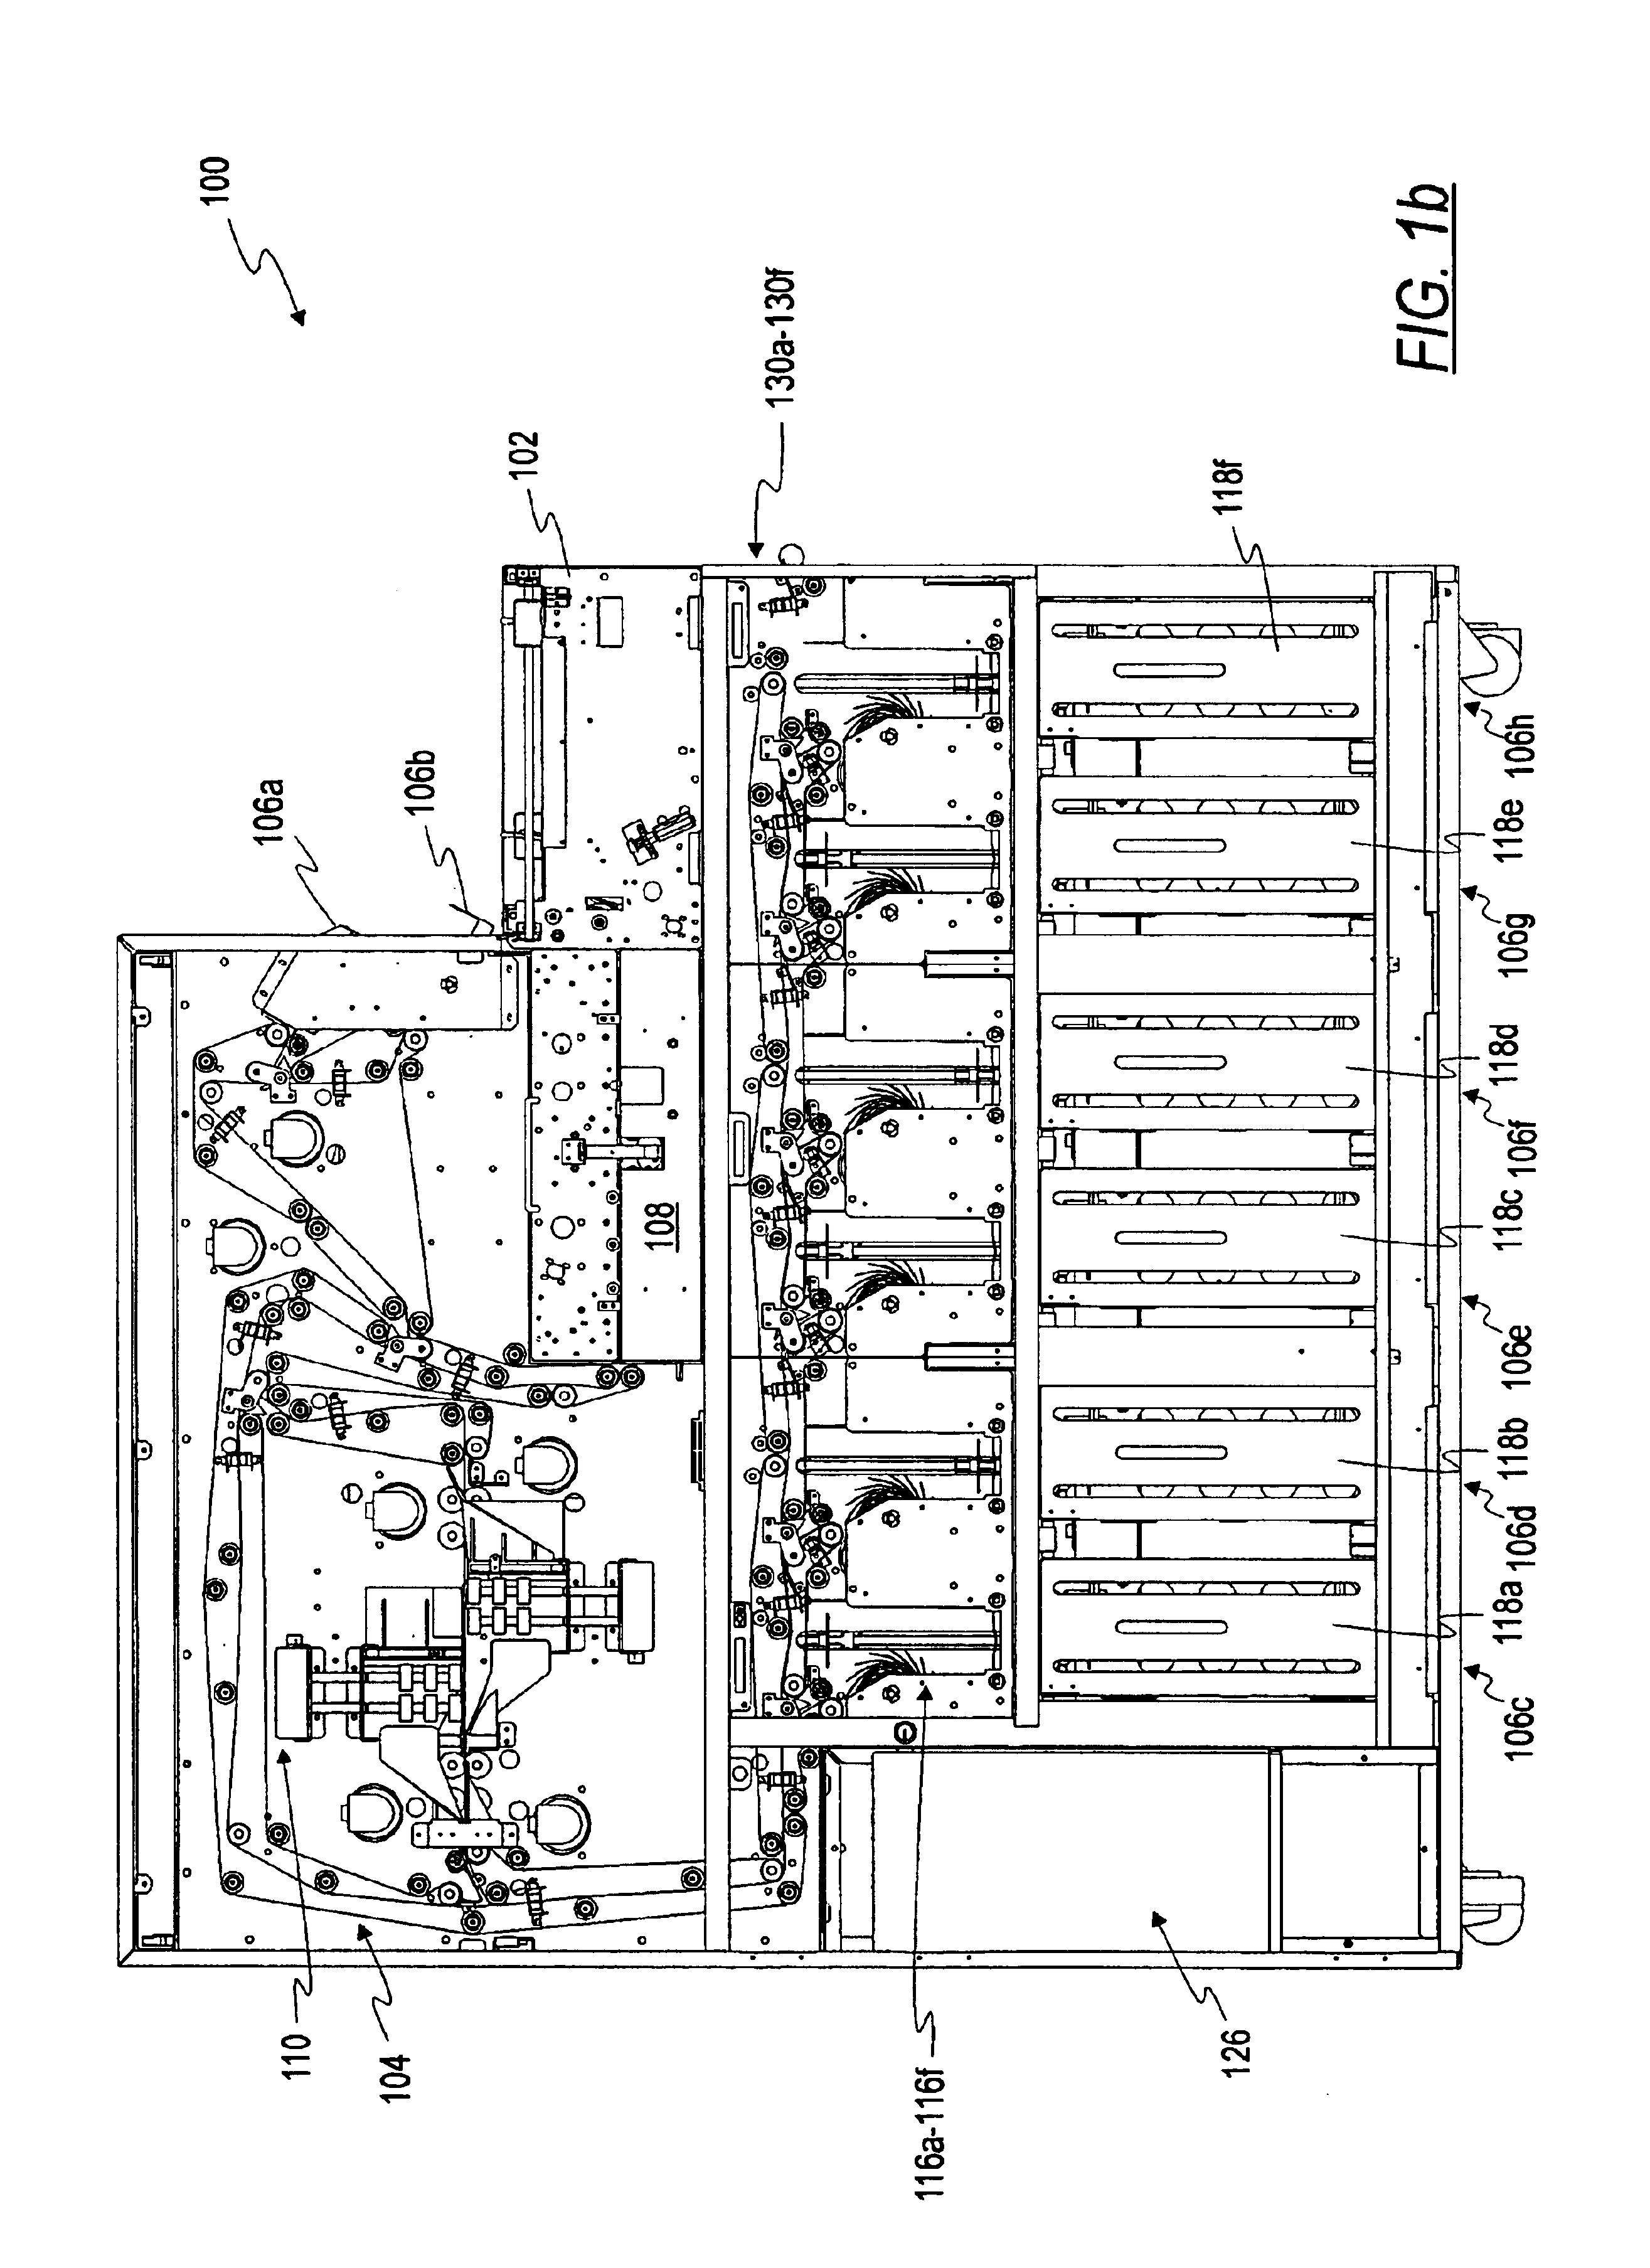 Multiple pocket currency bill processing device and method